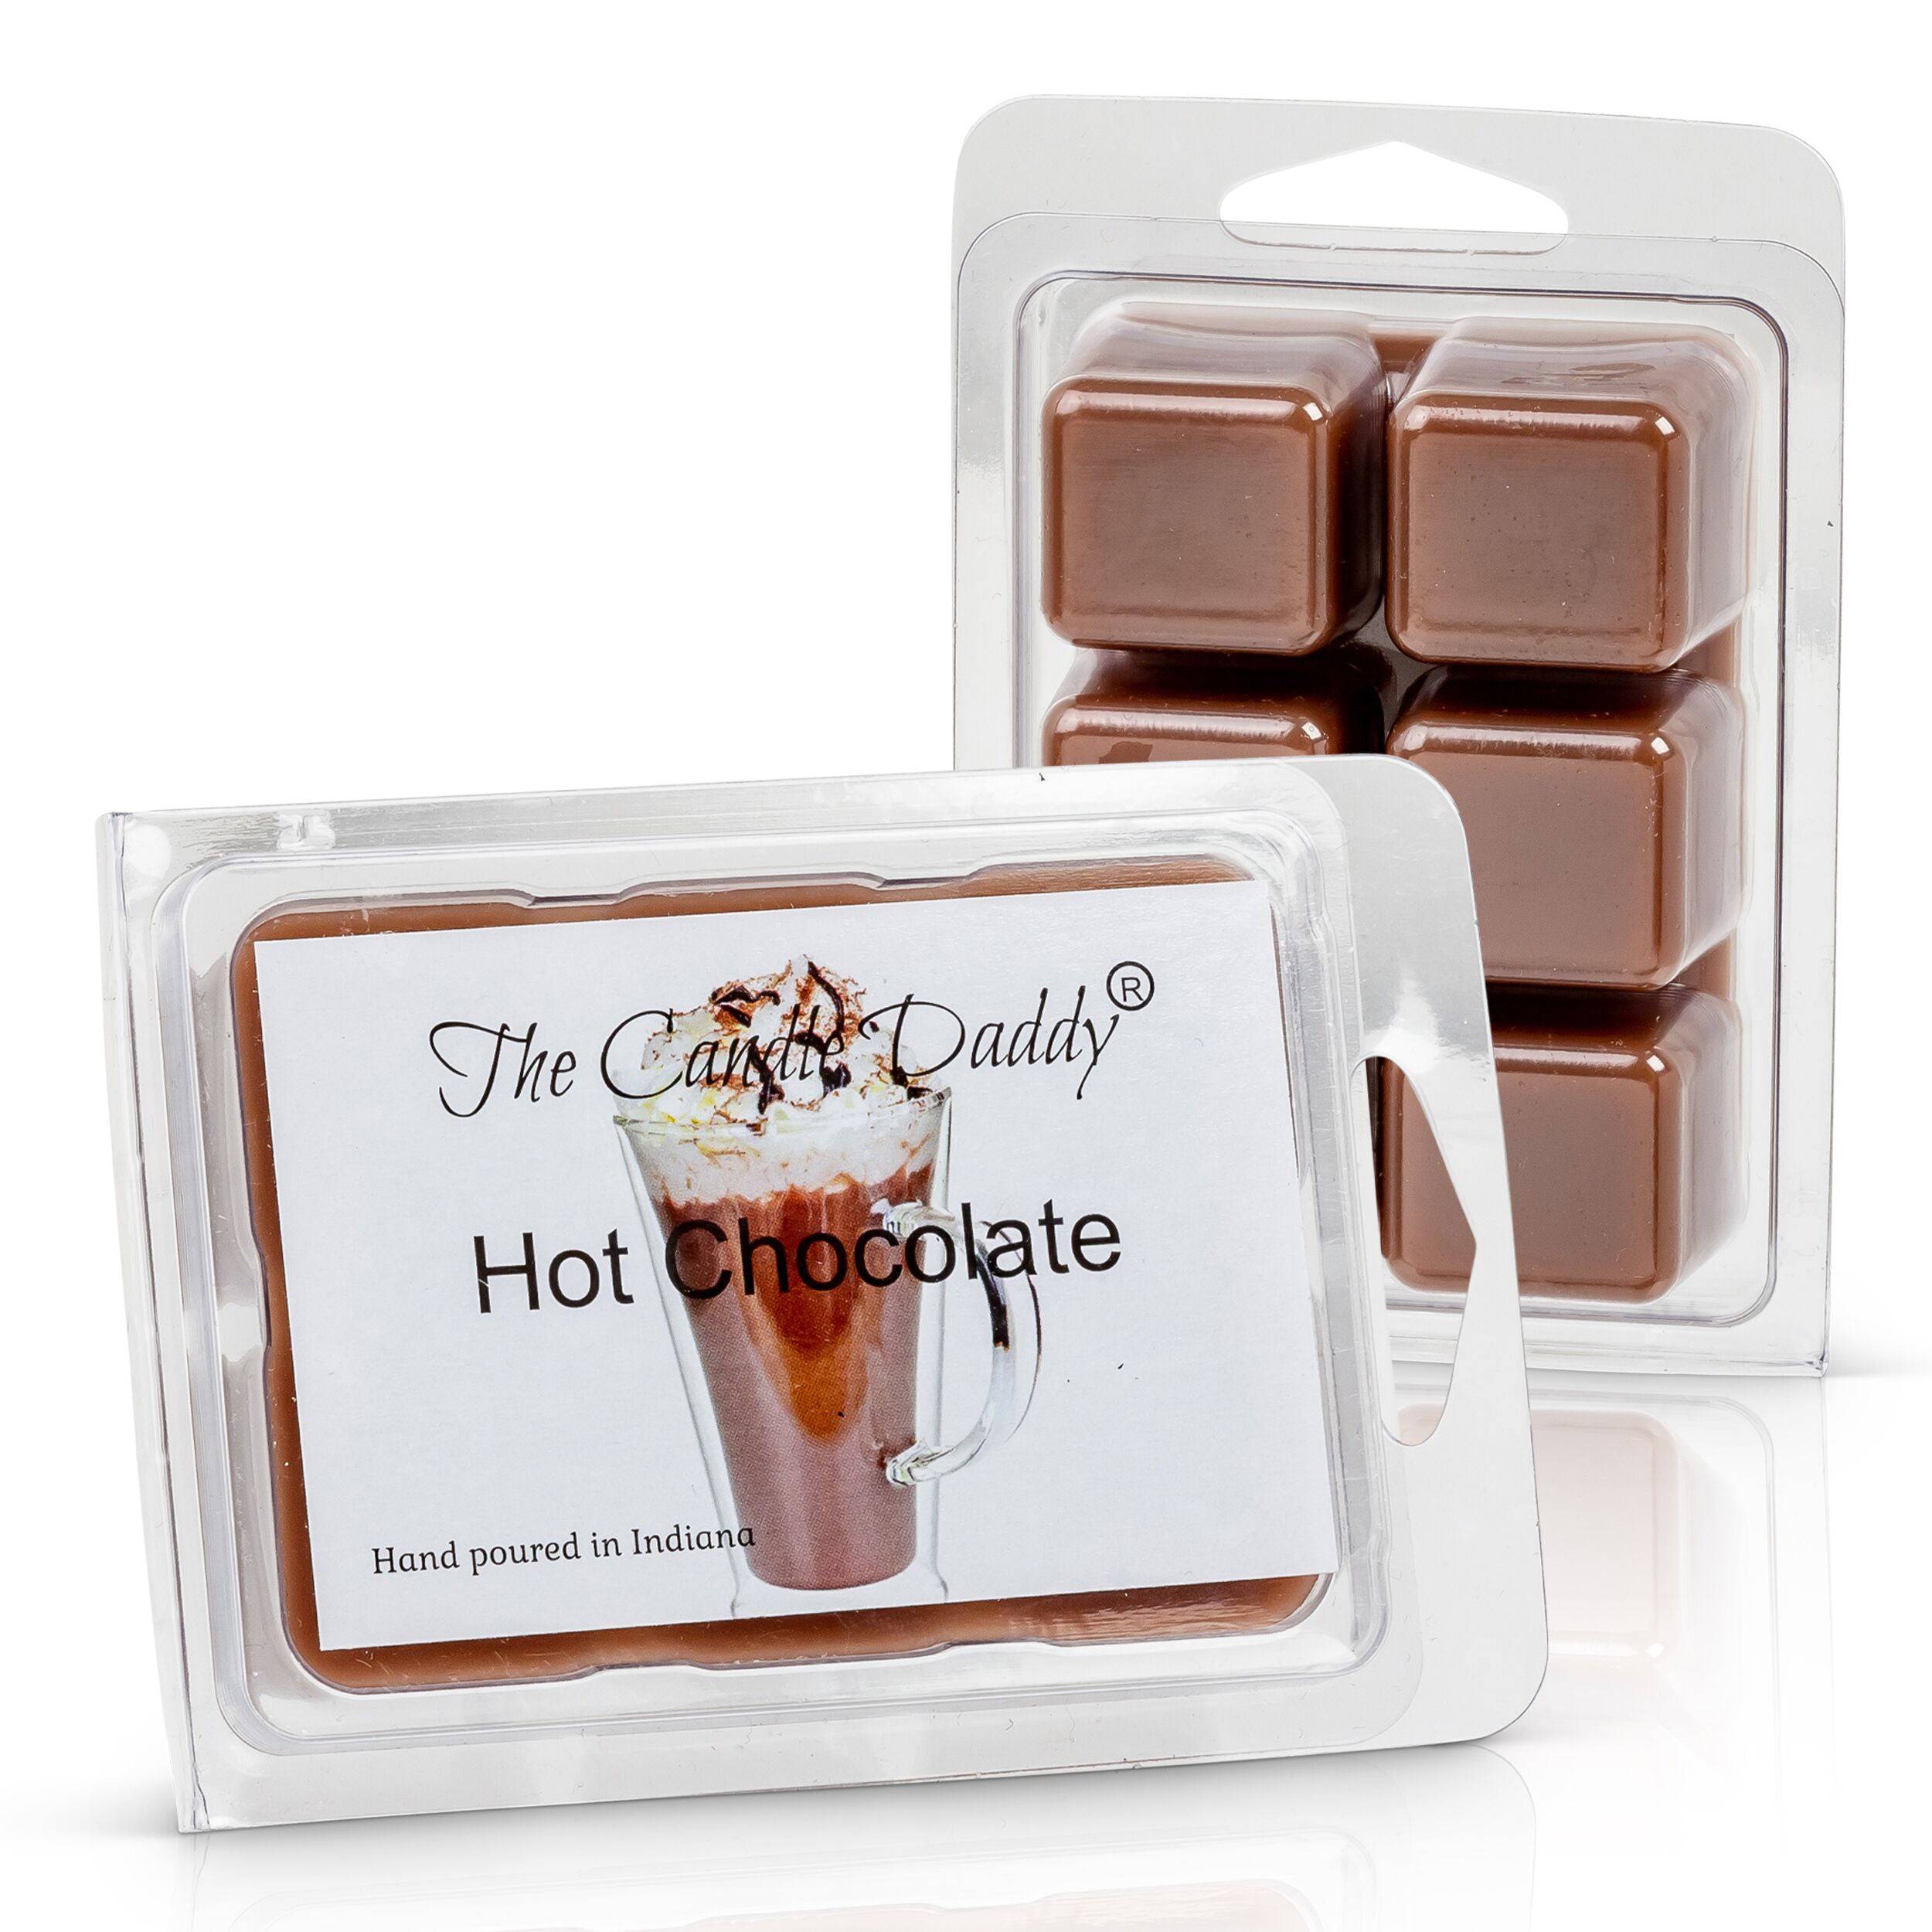 The Candle Daddy Coffee Scented Melt- Maximum Scent Wax Cubes